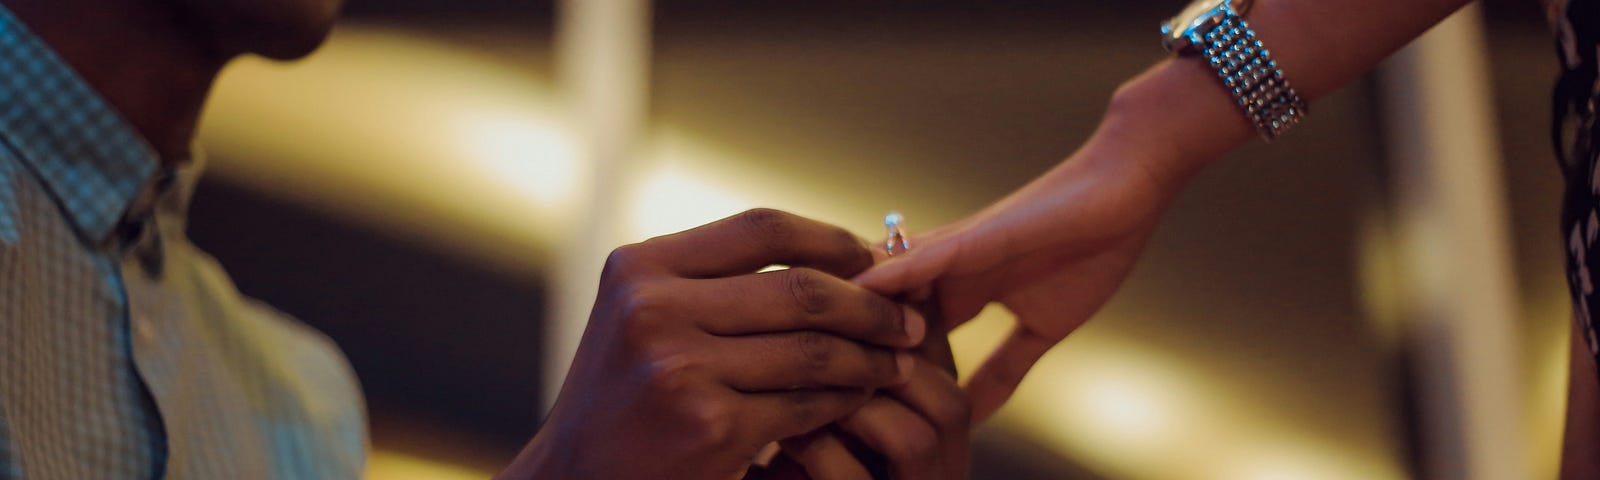 A close up, color photograph that partially shows a kneeling man, placing a ring on a woman’s hand.